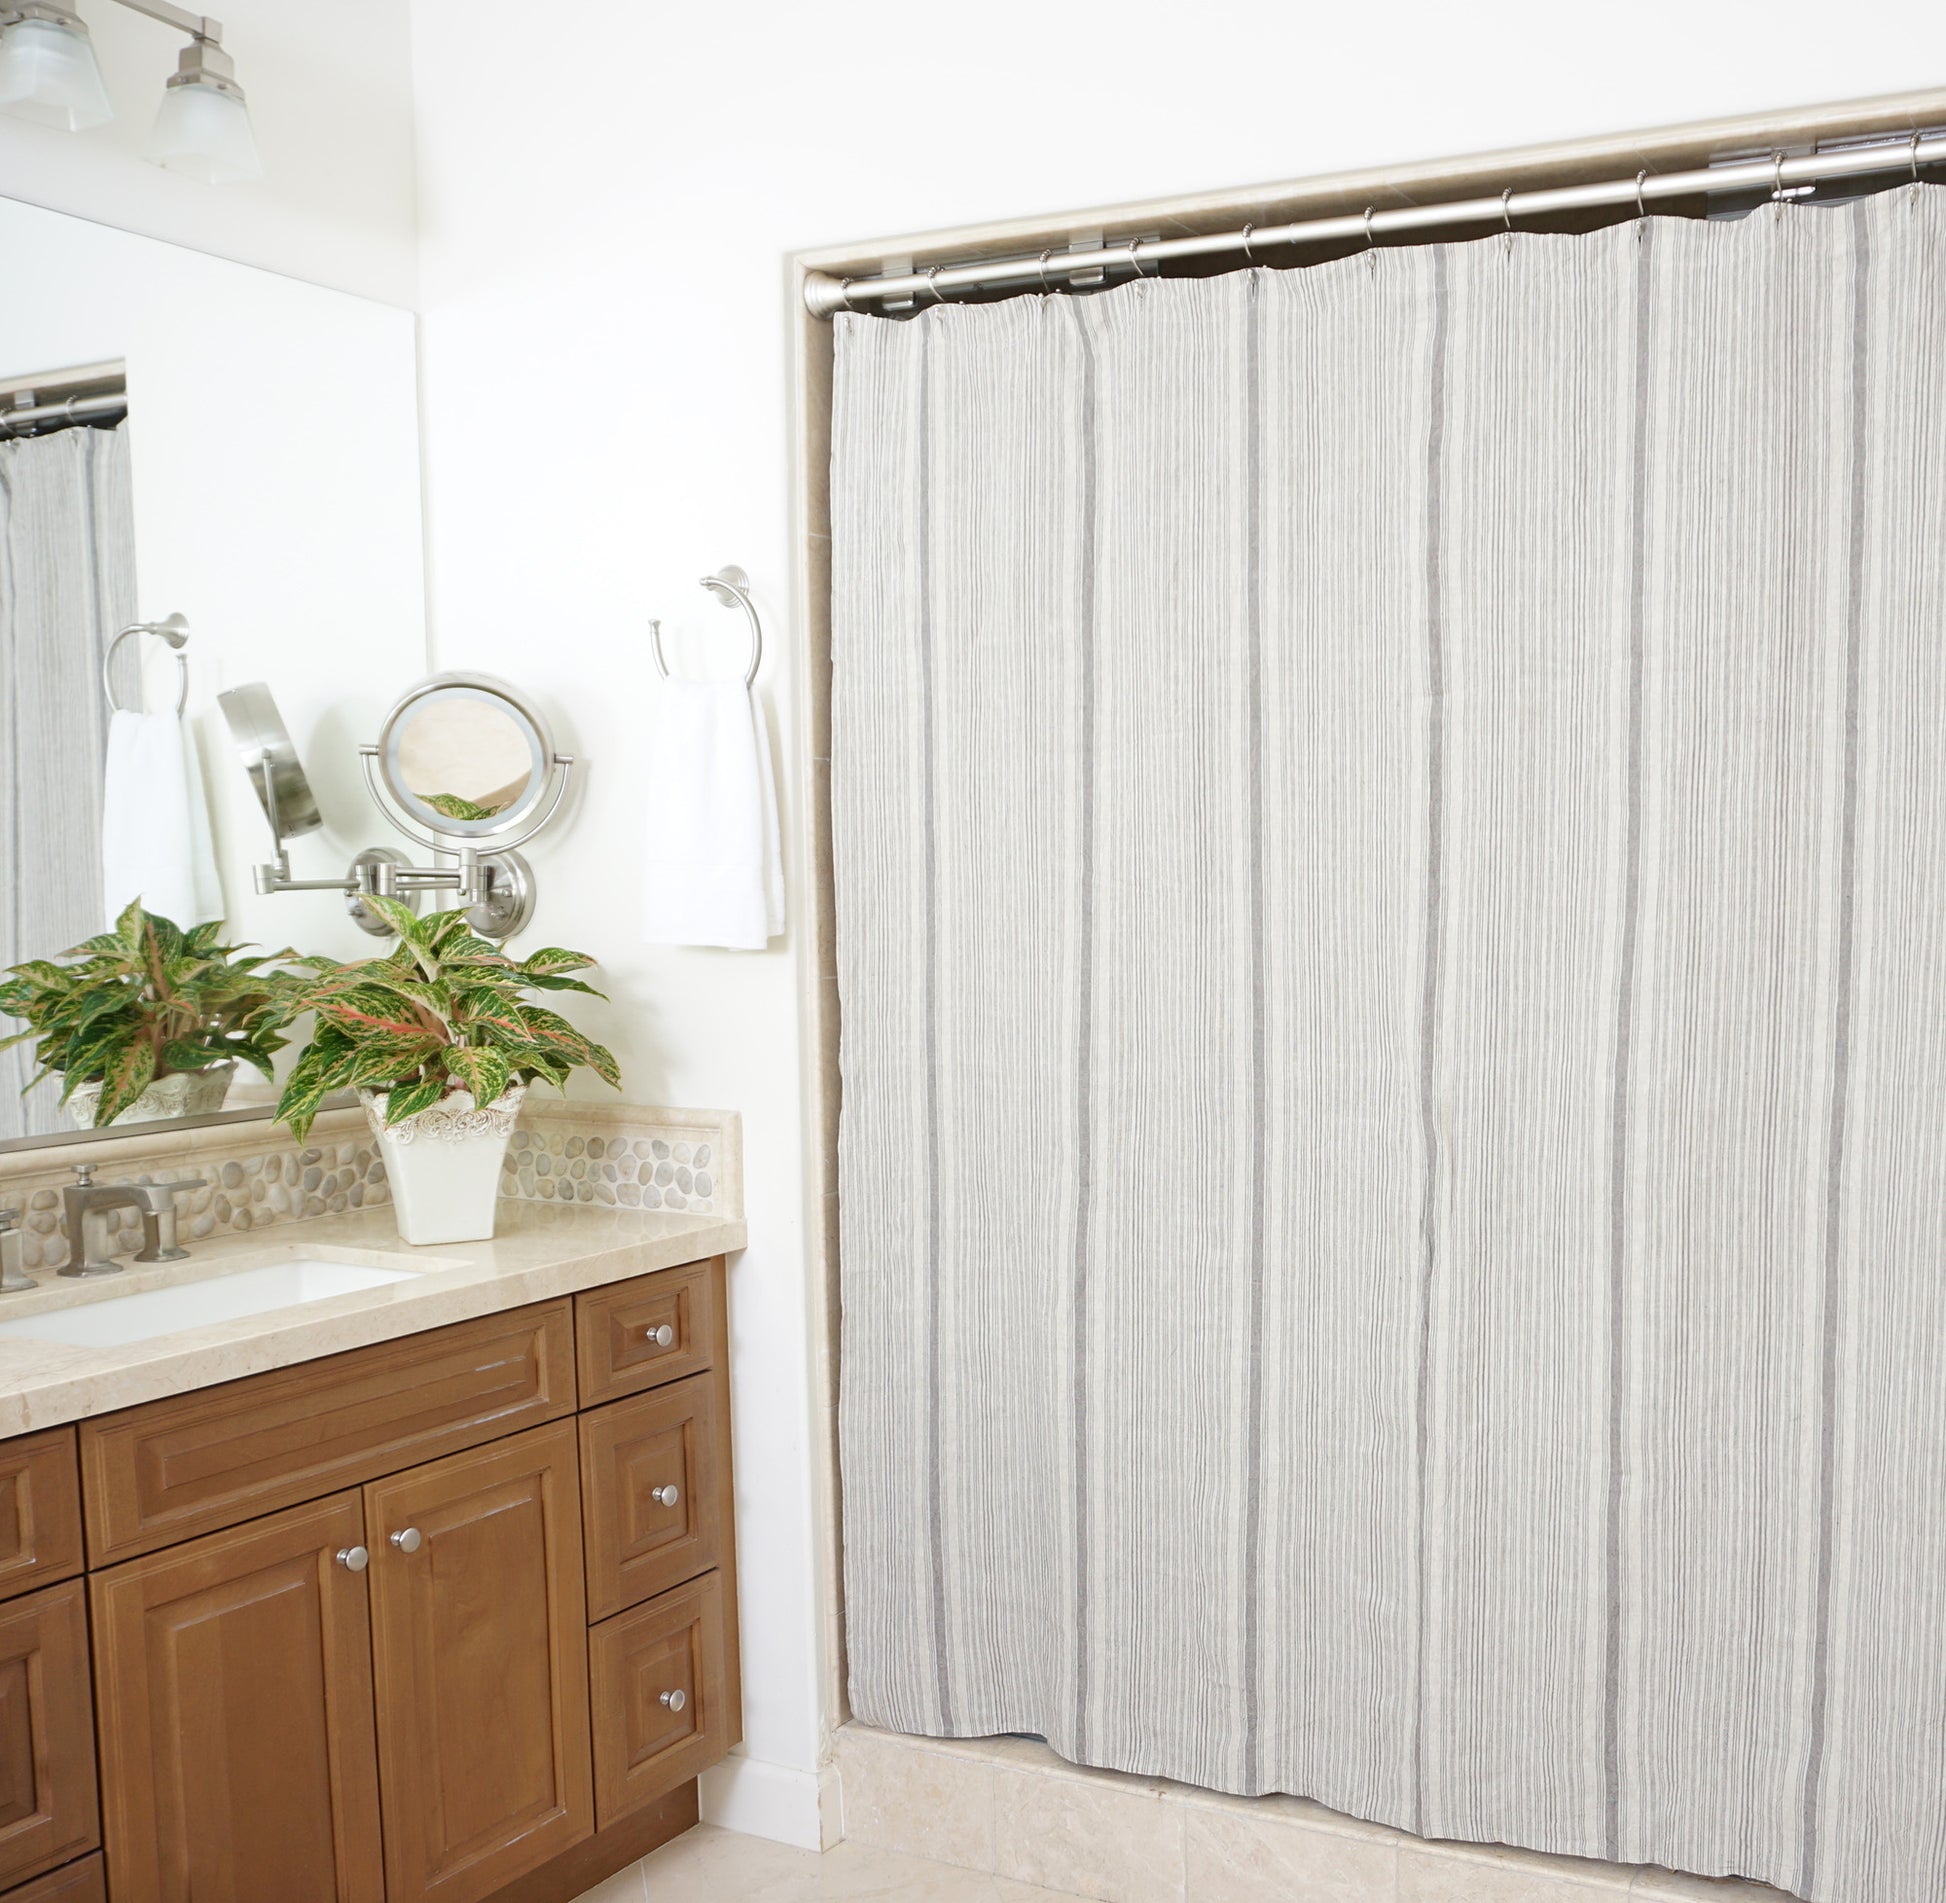 a white shower linen curtain curtain with ruffles